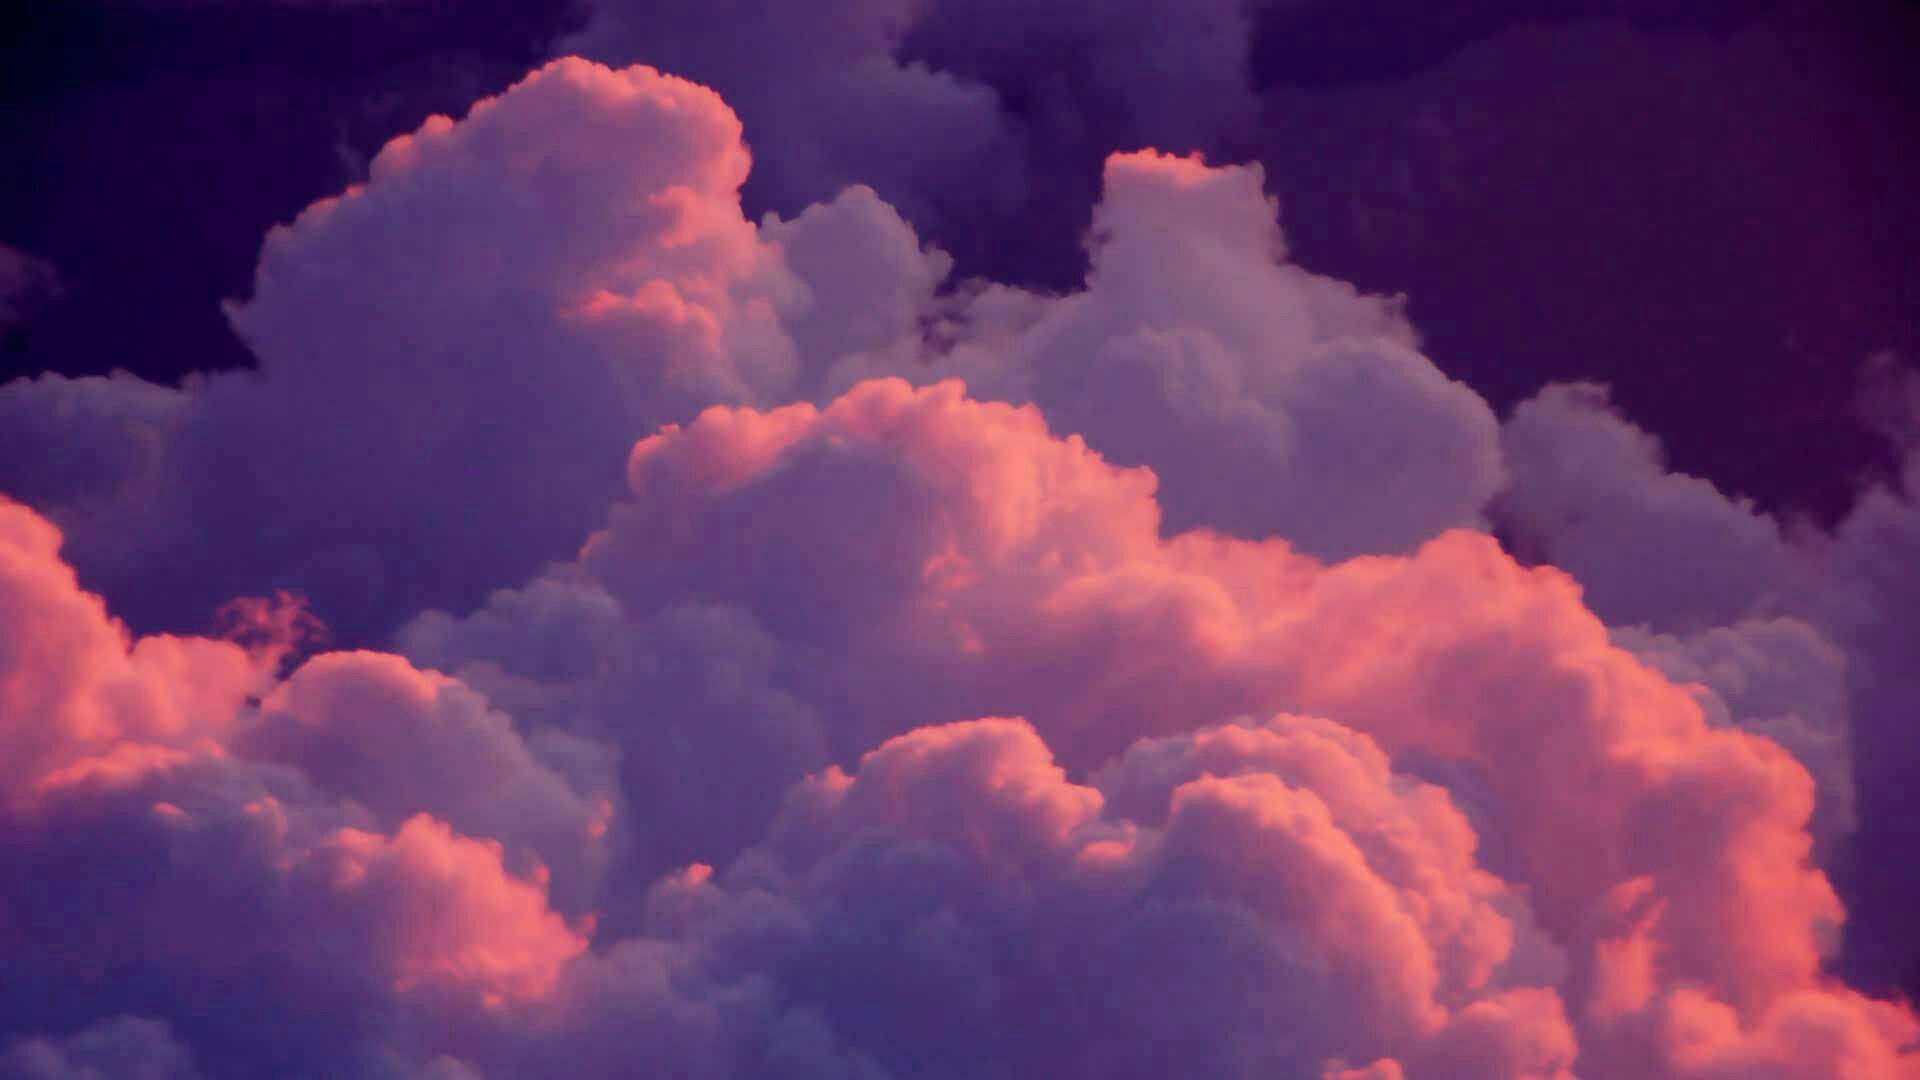 Aesthetic Cloud PC Wallpaper Free Aesthetic Cloud PC Background